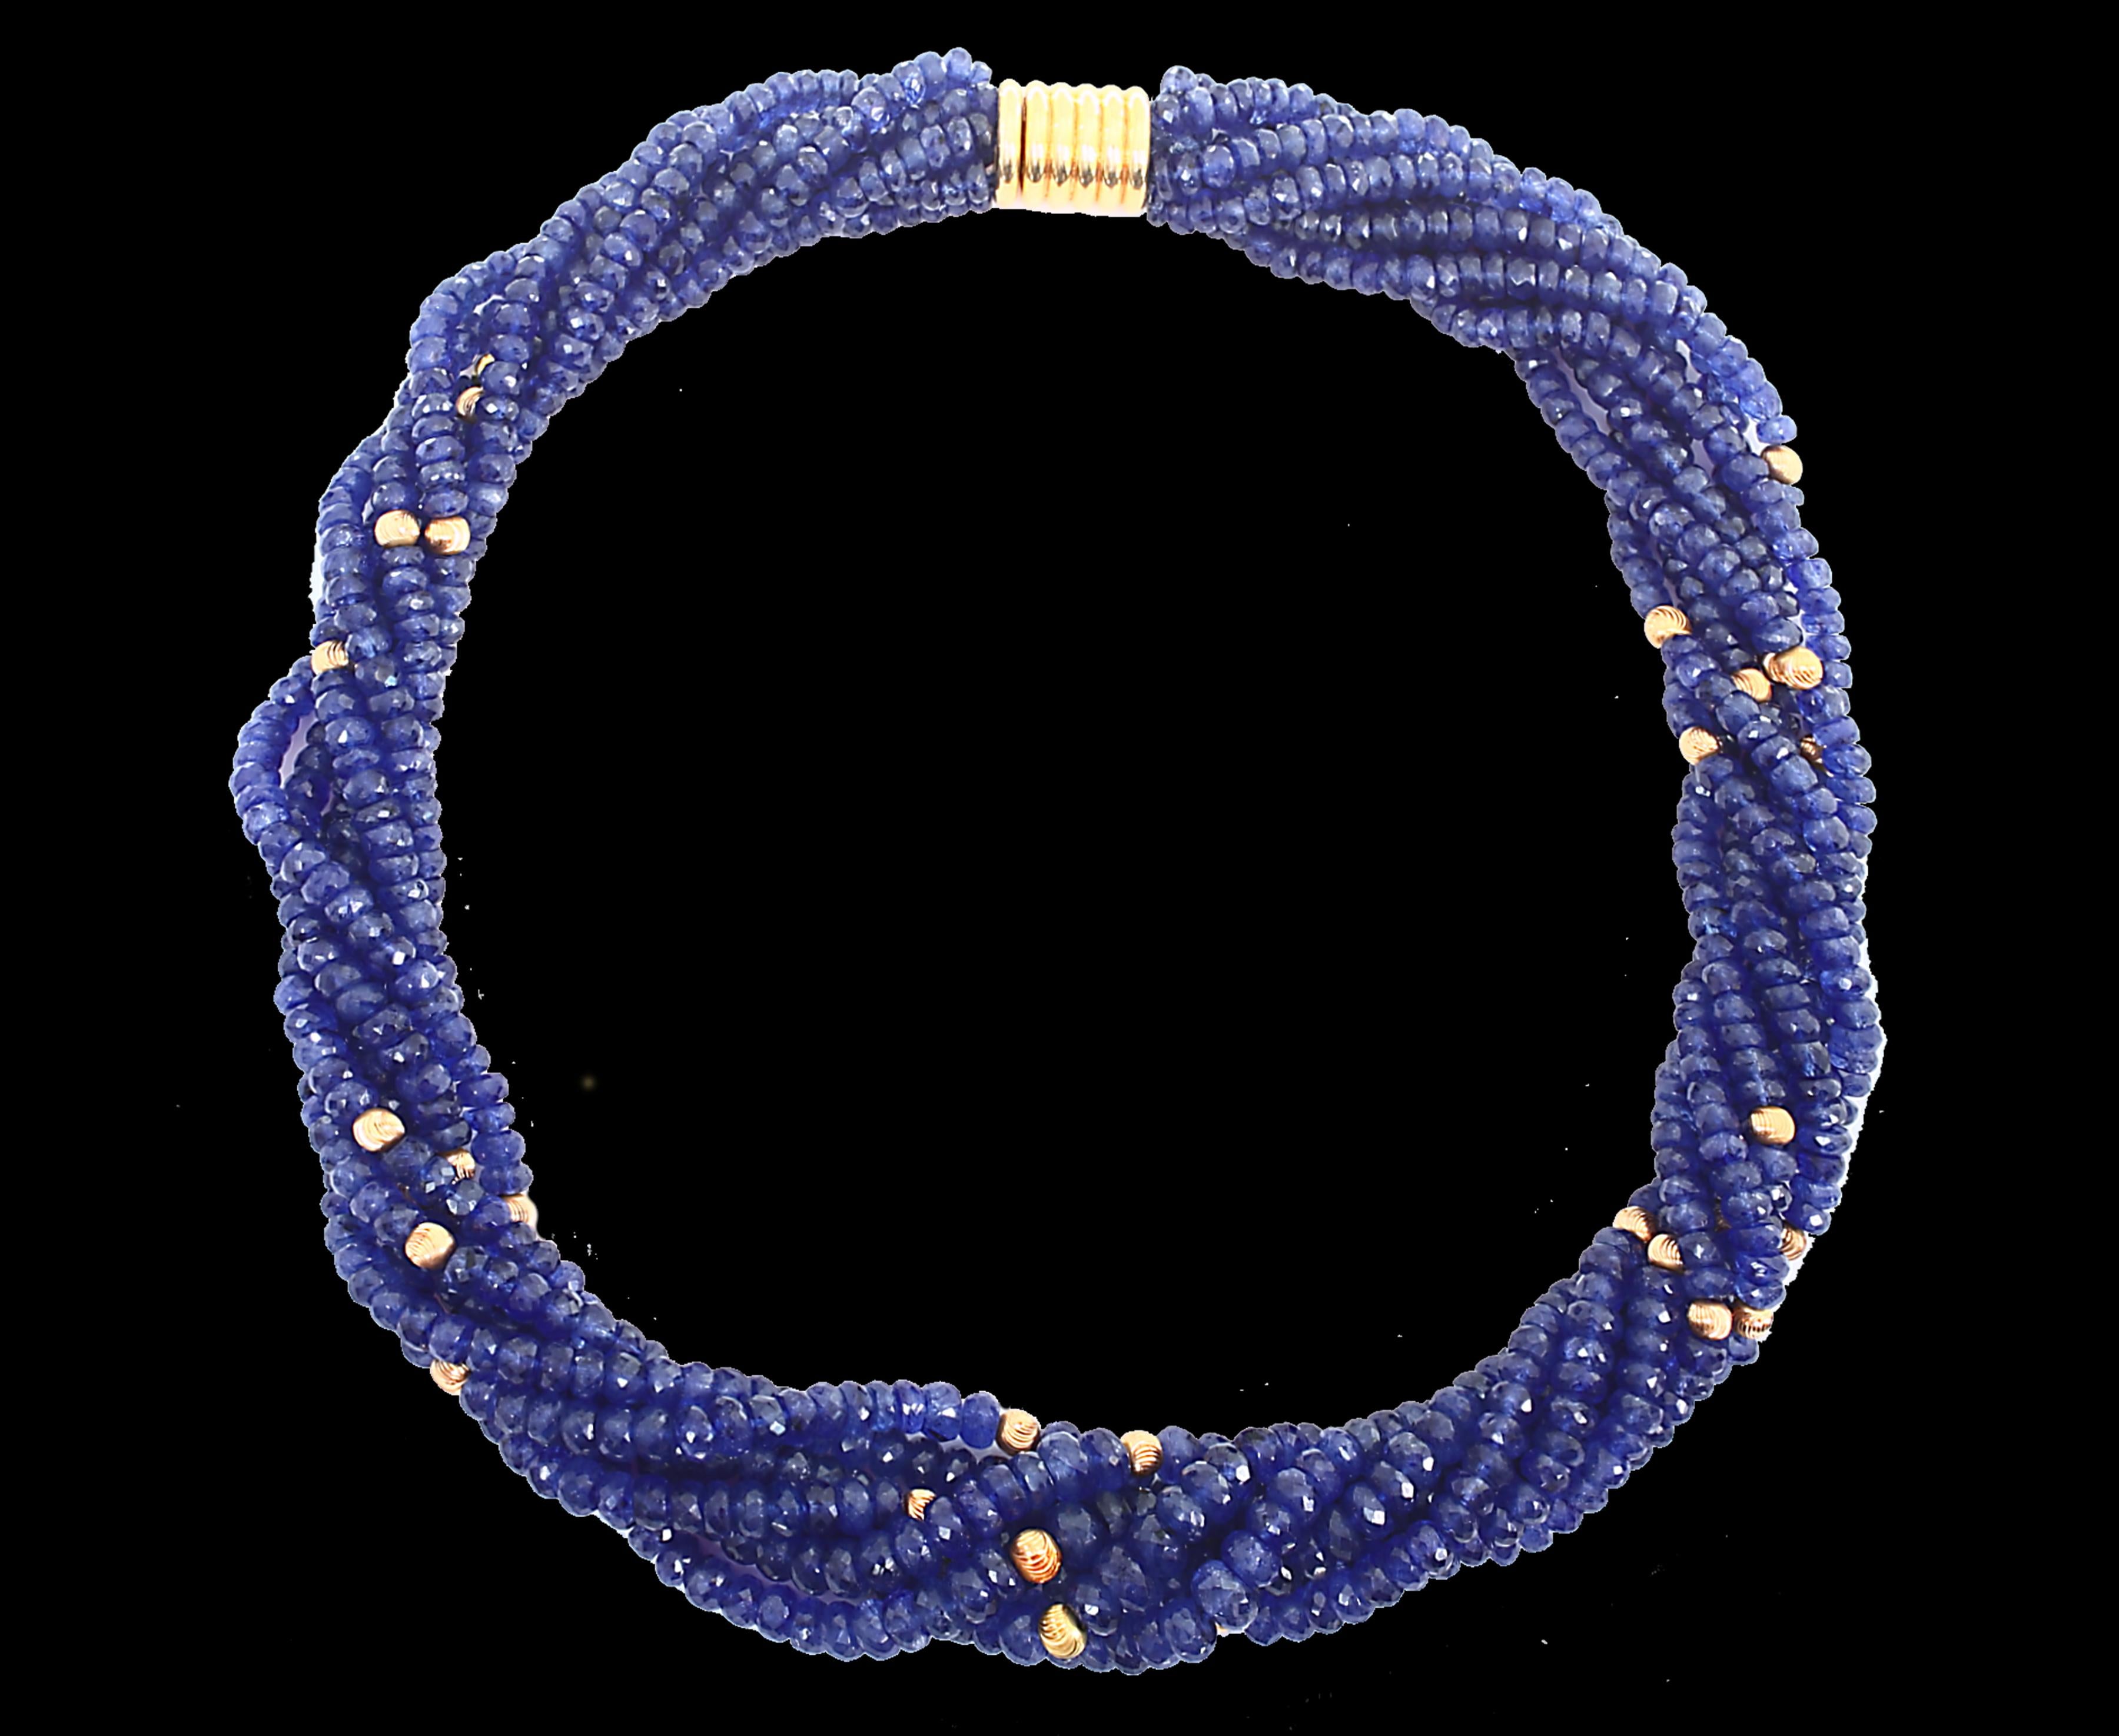  Twisted Faceted 1275 Ct Natural Tanzanite Bead Seven  Strand Necklace With  14 Karat Yellow  Gold balls 
All natural beads , no color enhancement
Twisted Necklace
7 layers of Natural  Beads
These are faceted  beads , have  very much  Luster and